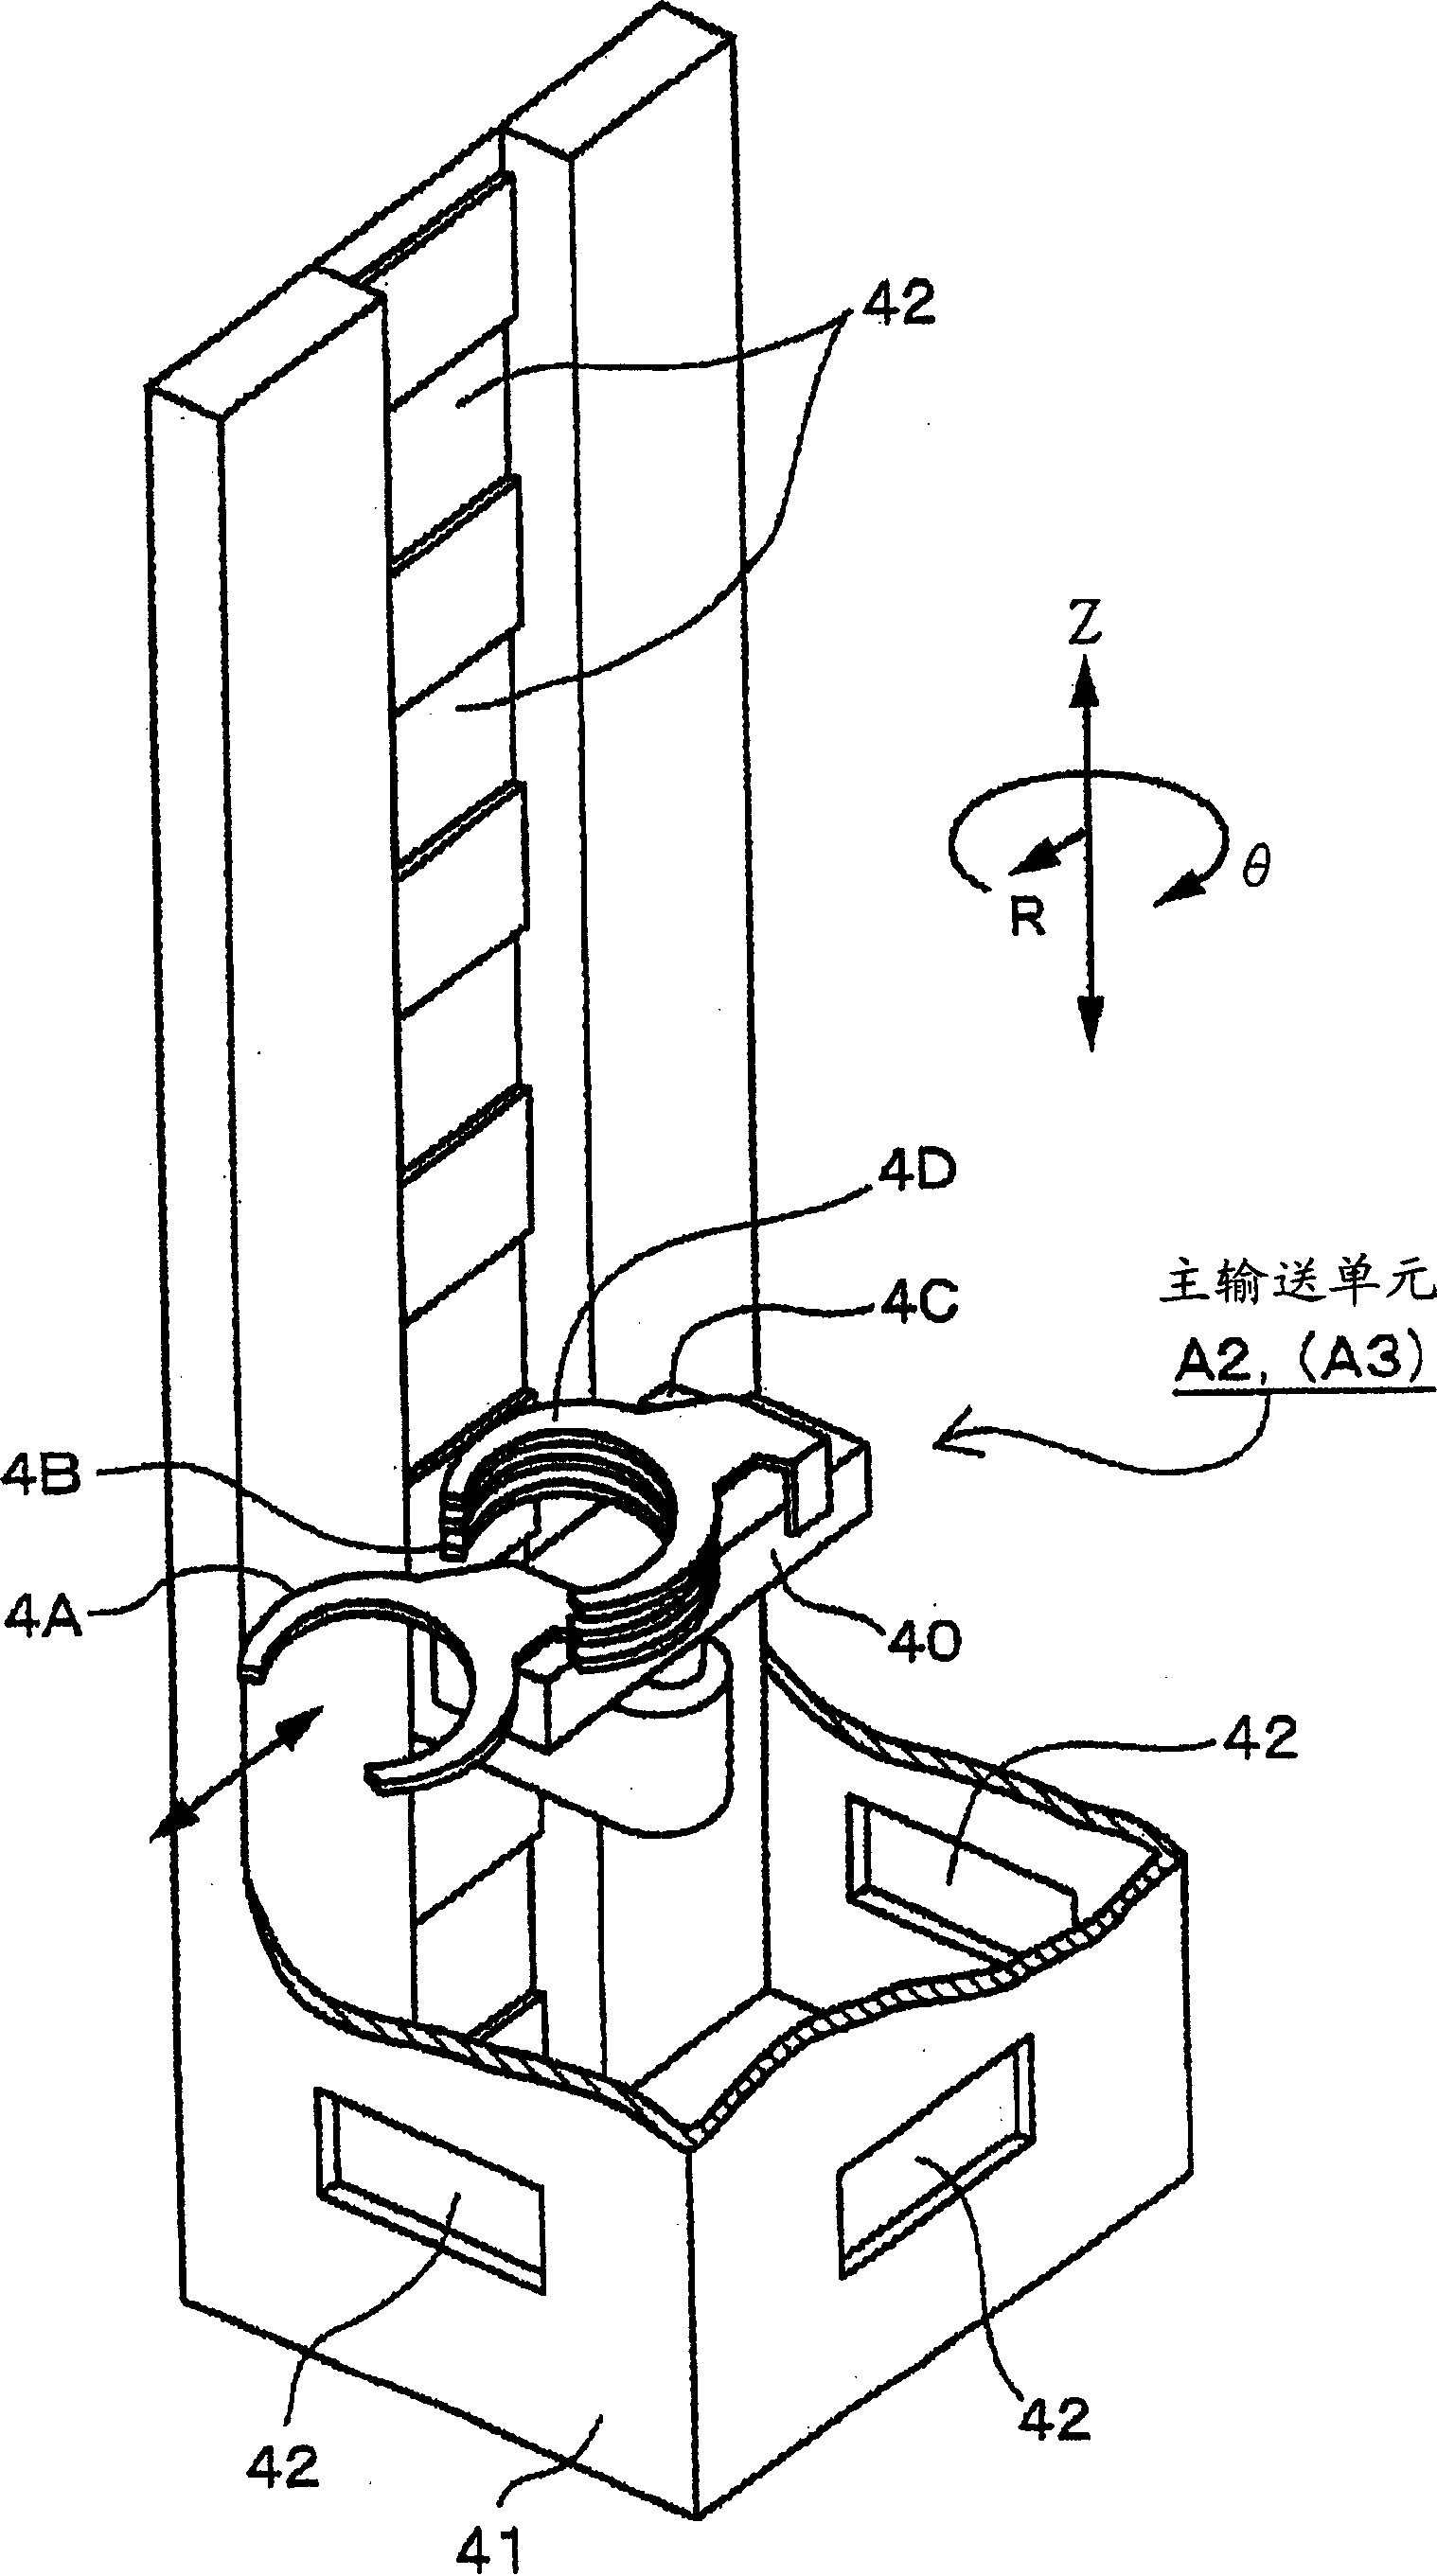 Substrate processing apparatus and method for adjusting a substrate transfer position